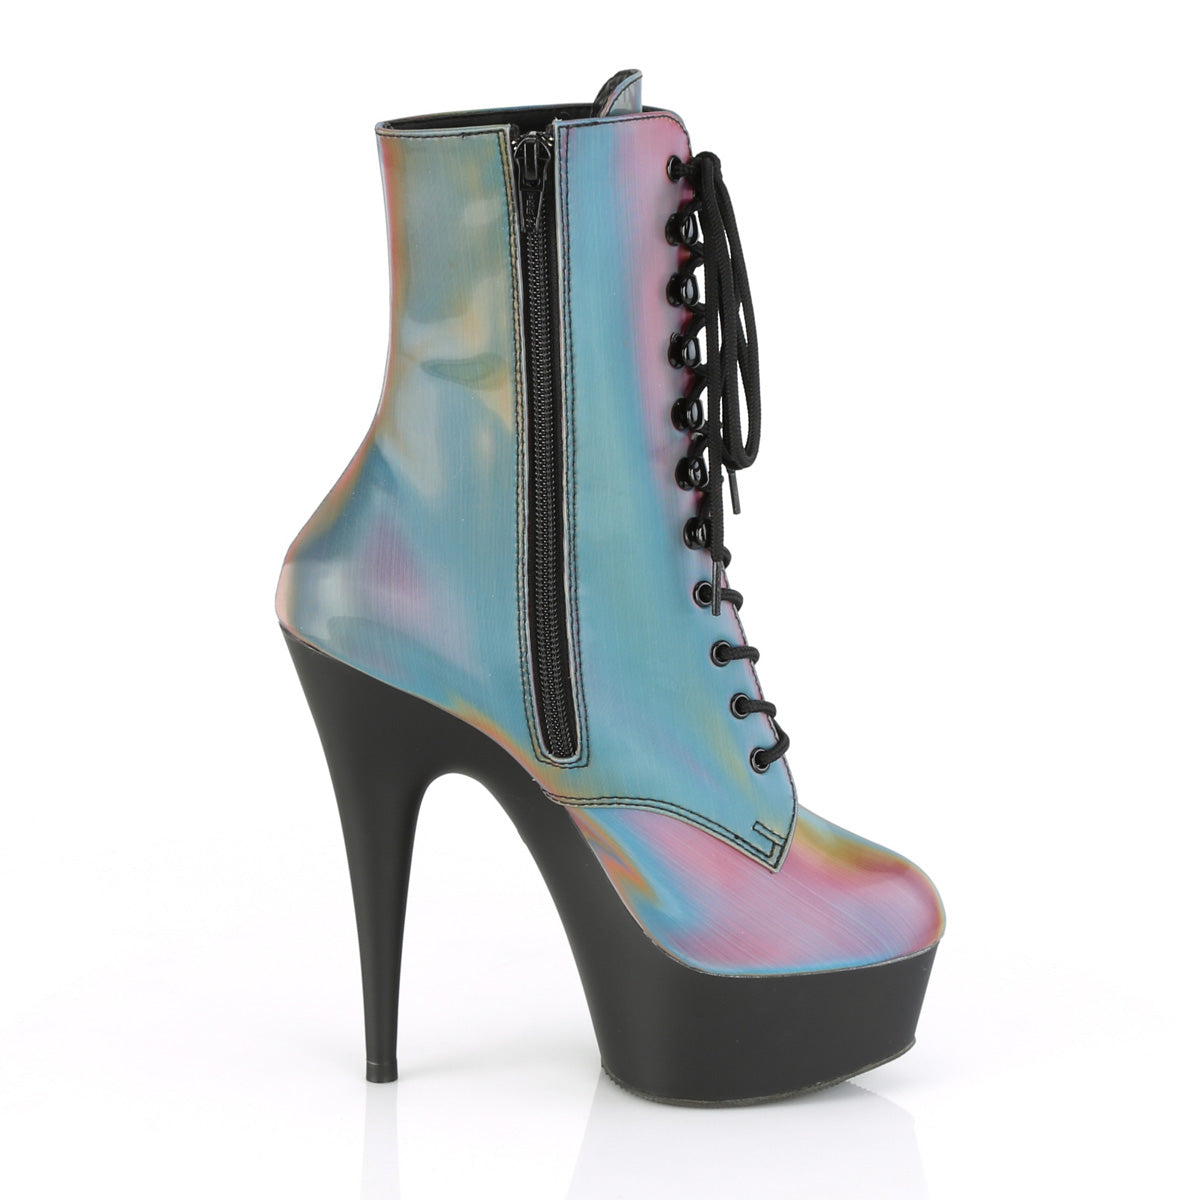 DELIGHT-1020REFL Pleaser Pole Dancing Shoes Ankle Boots Pleasers - Sexy Shoes Fetish Heels